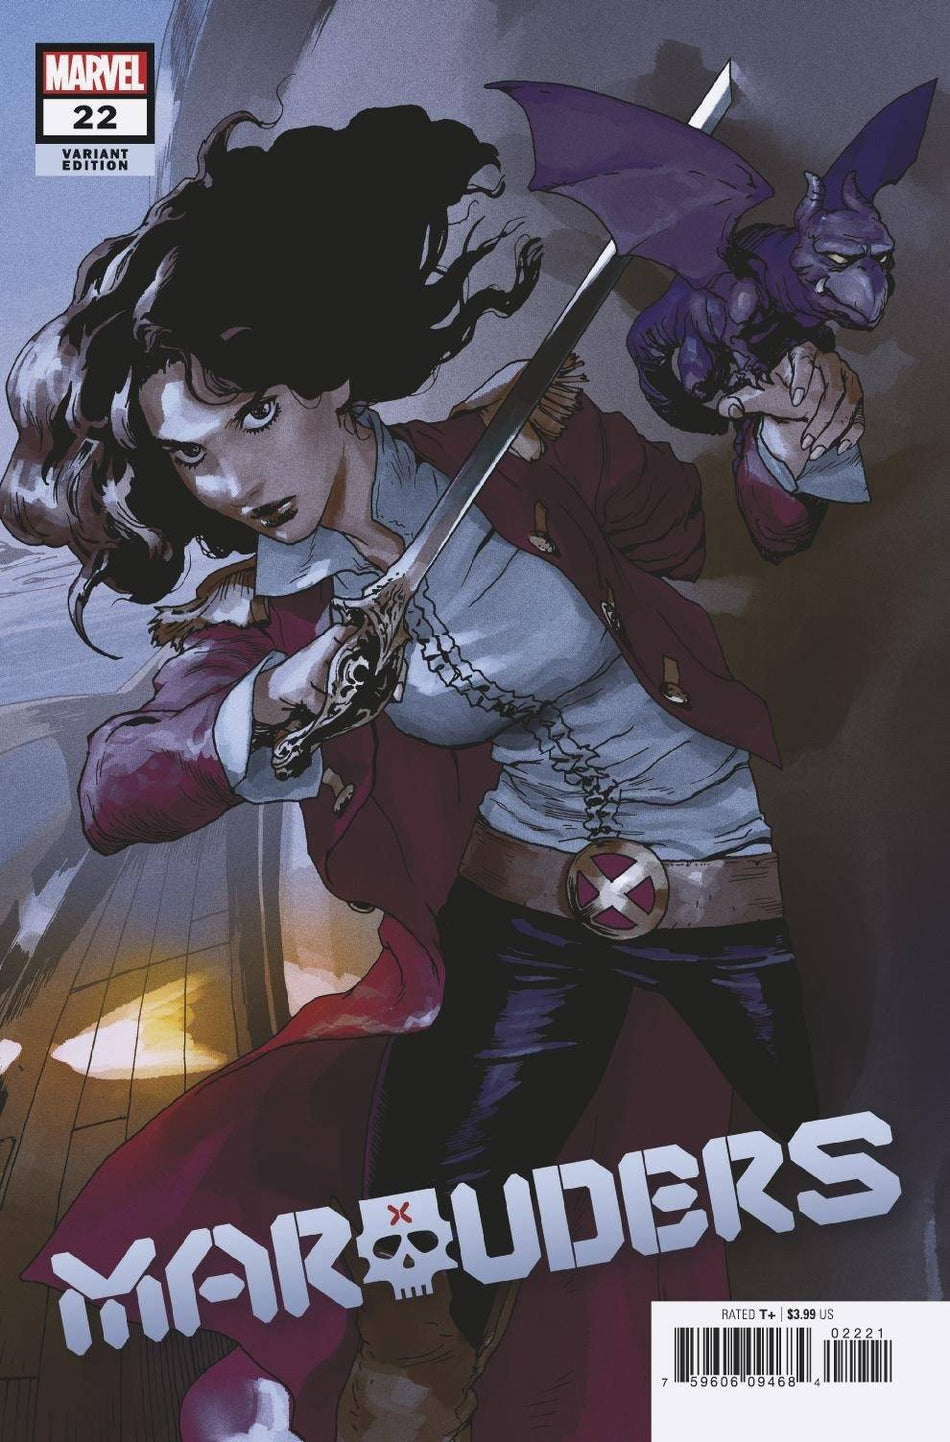 Photo of Marauders Issue 22 Parel Var comic sold by Stronghold Collectibles